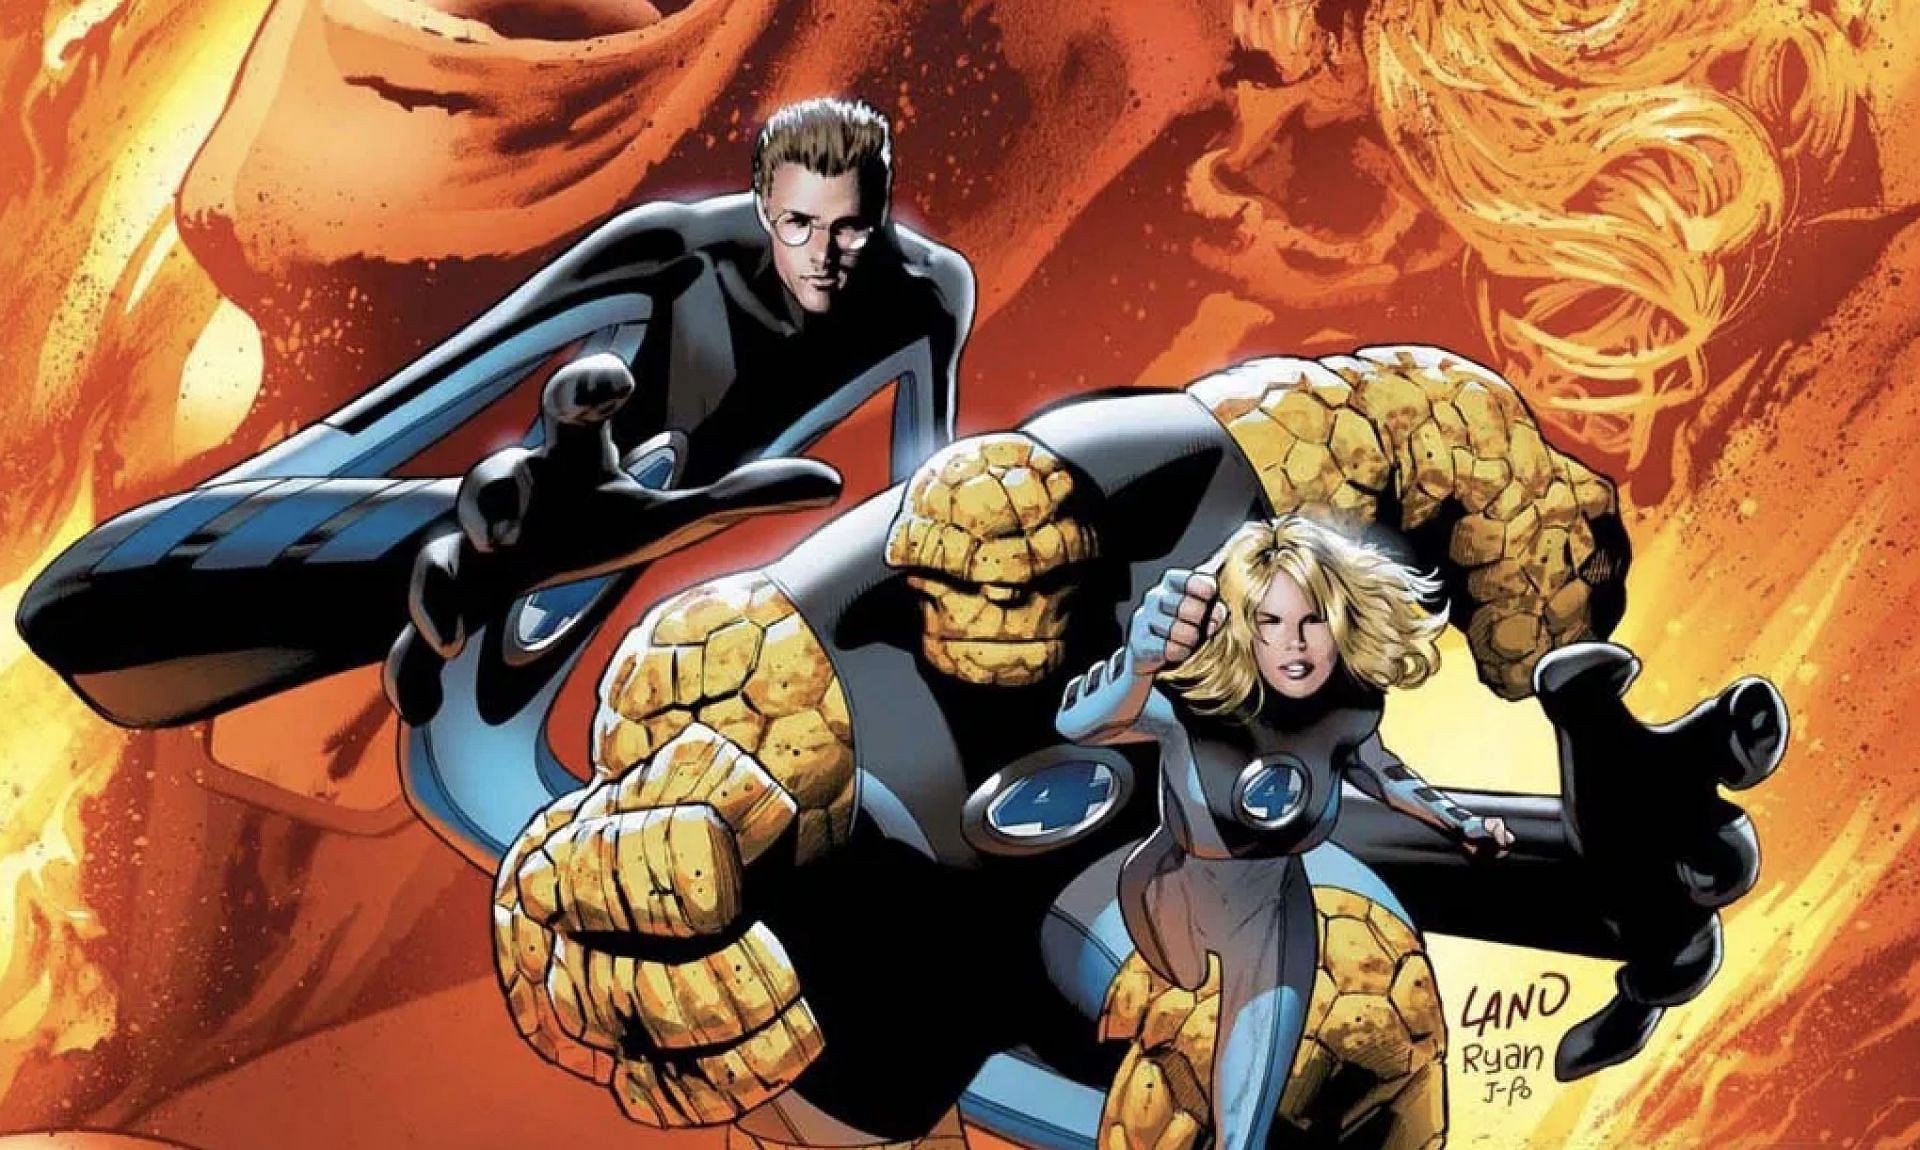 Get ready for adventure: The film is set to release in 2025 (Image via Marvel Comics)